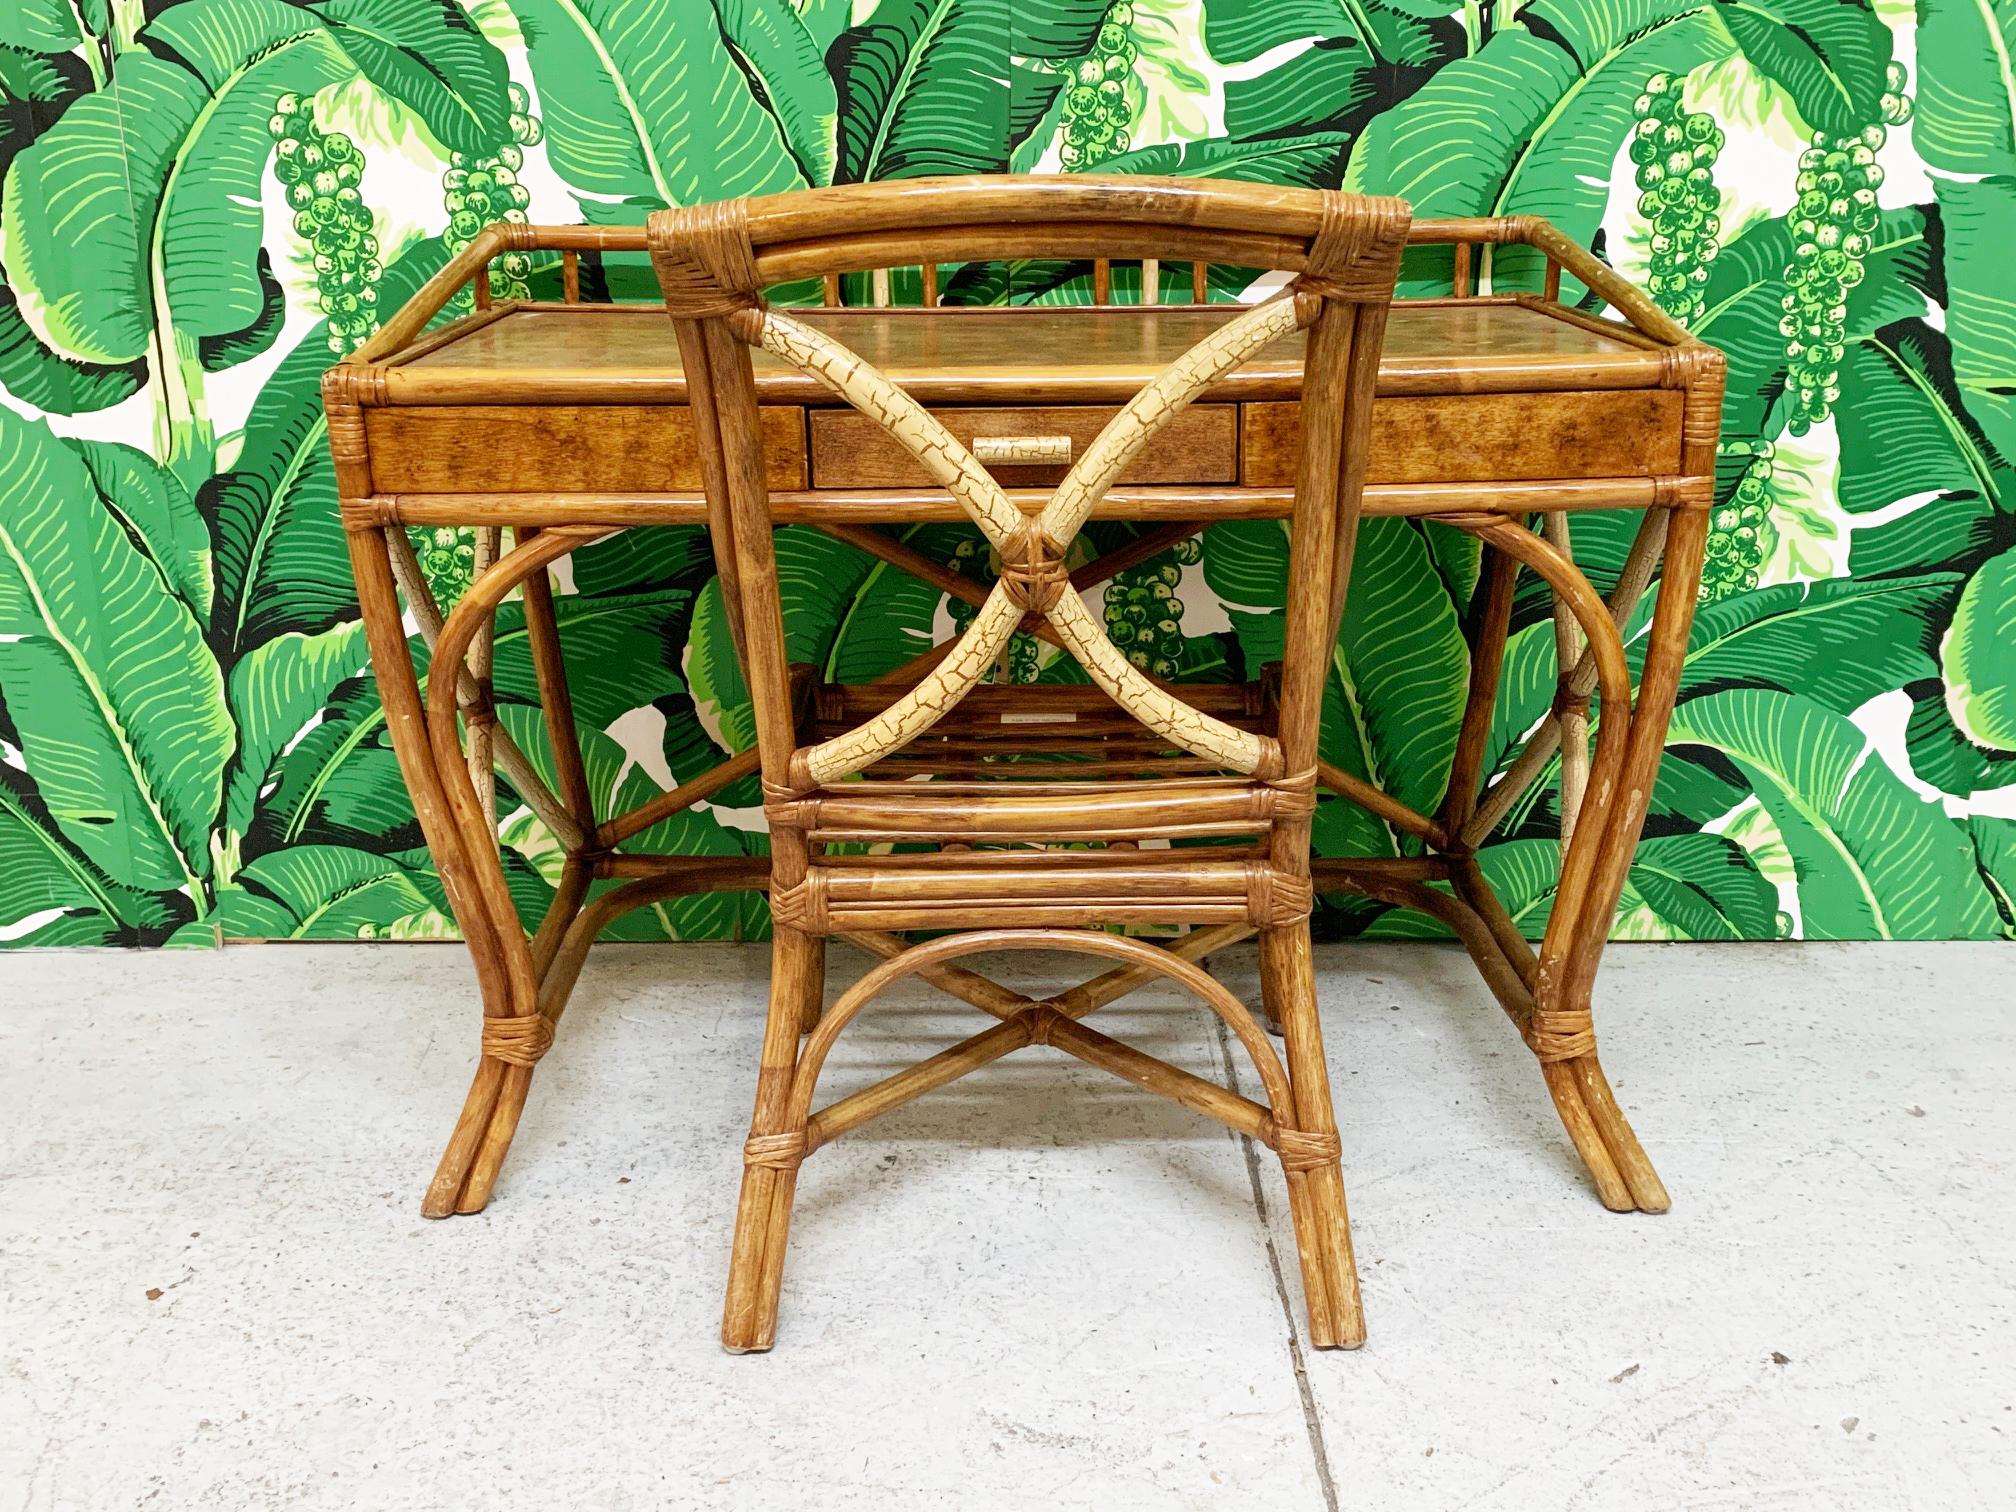 Vintage bamboo and rattan desk from the Philippines features gated top and splayed legs, along with a unique two-toned finish. Good vintage condition with minor imperfections consistent with age.
Desk measures 43